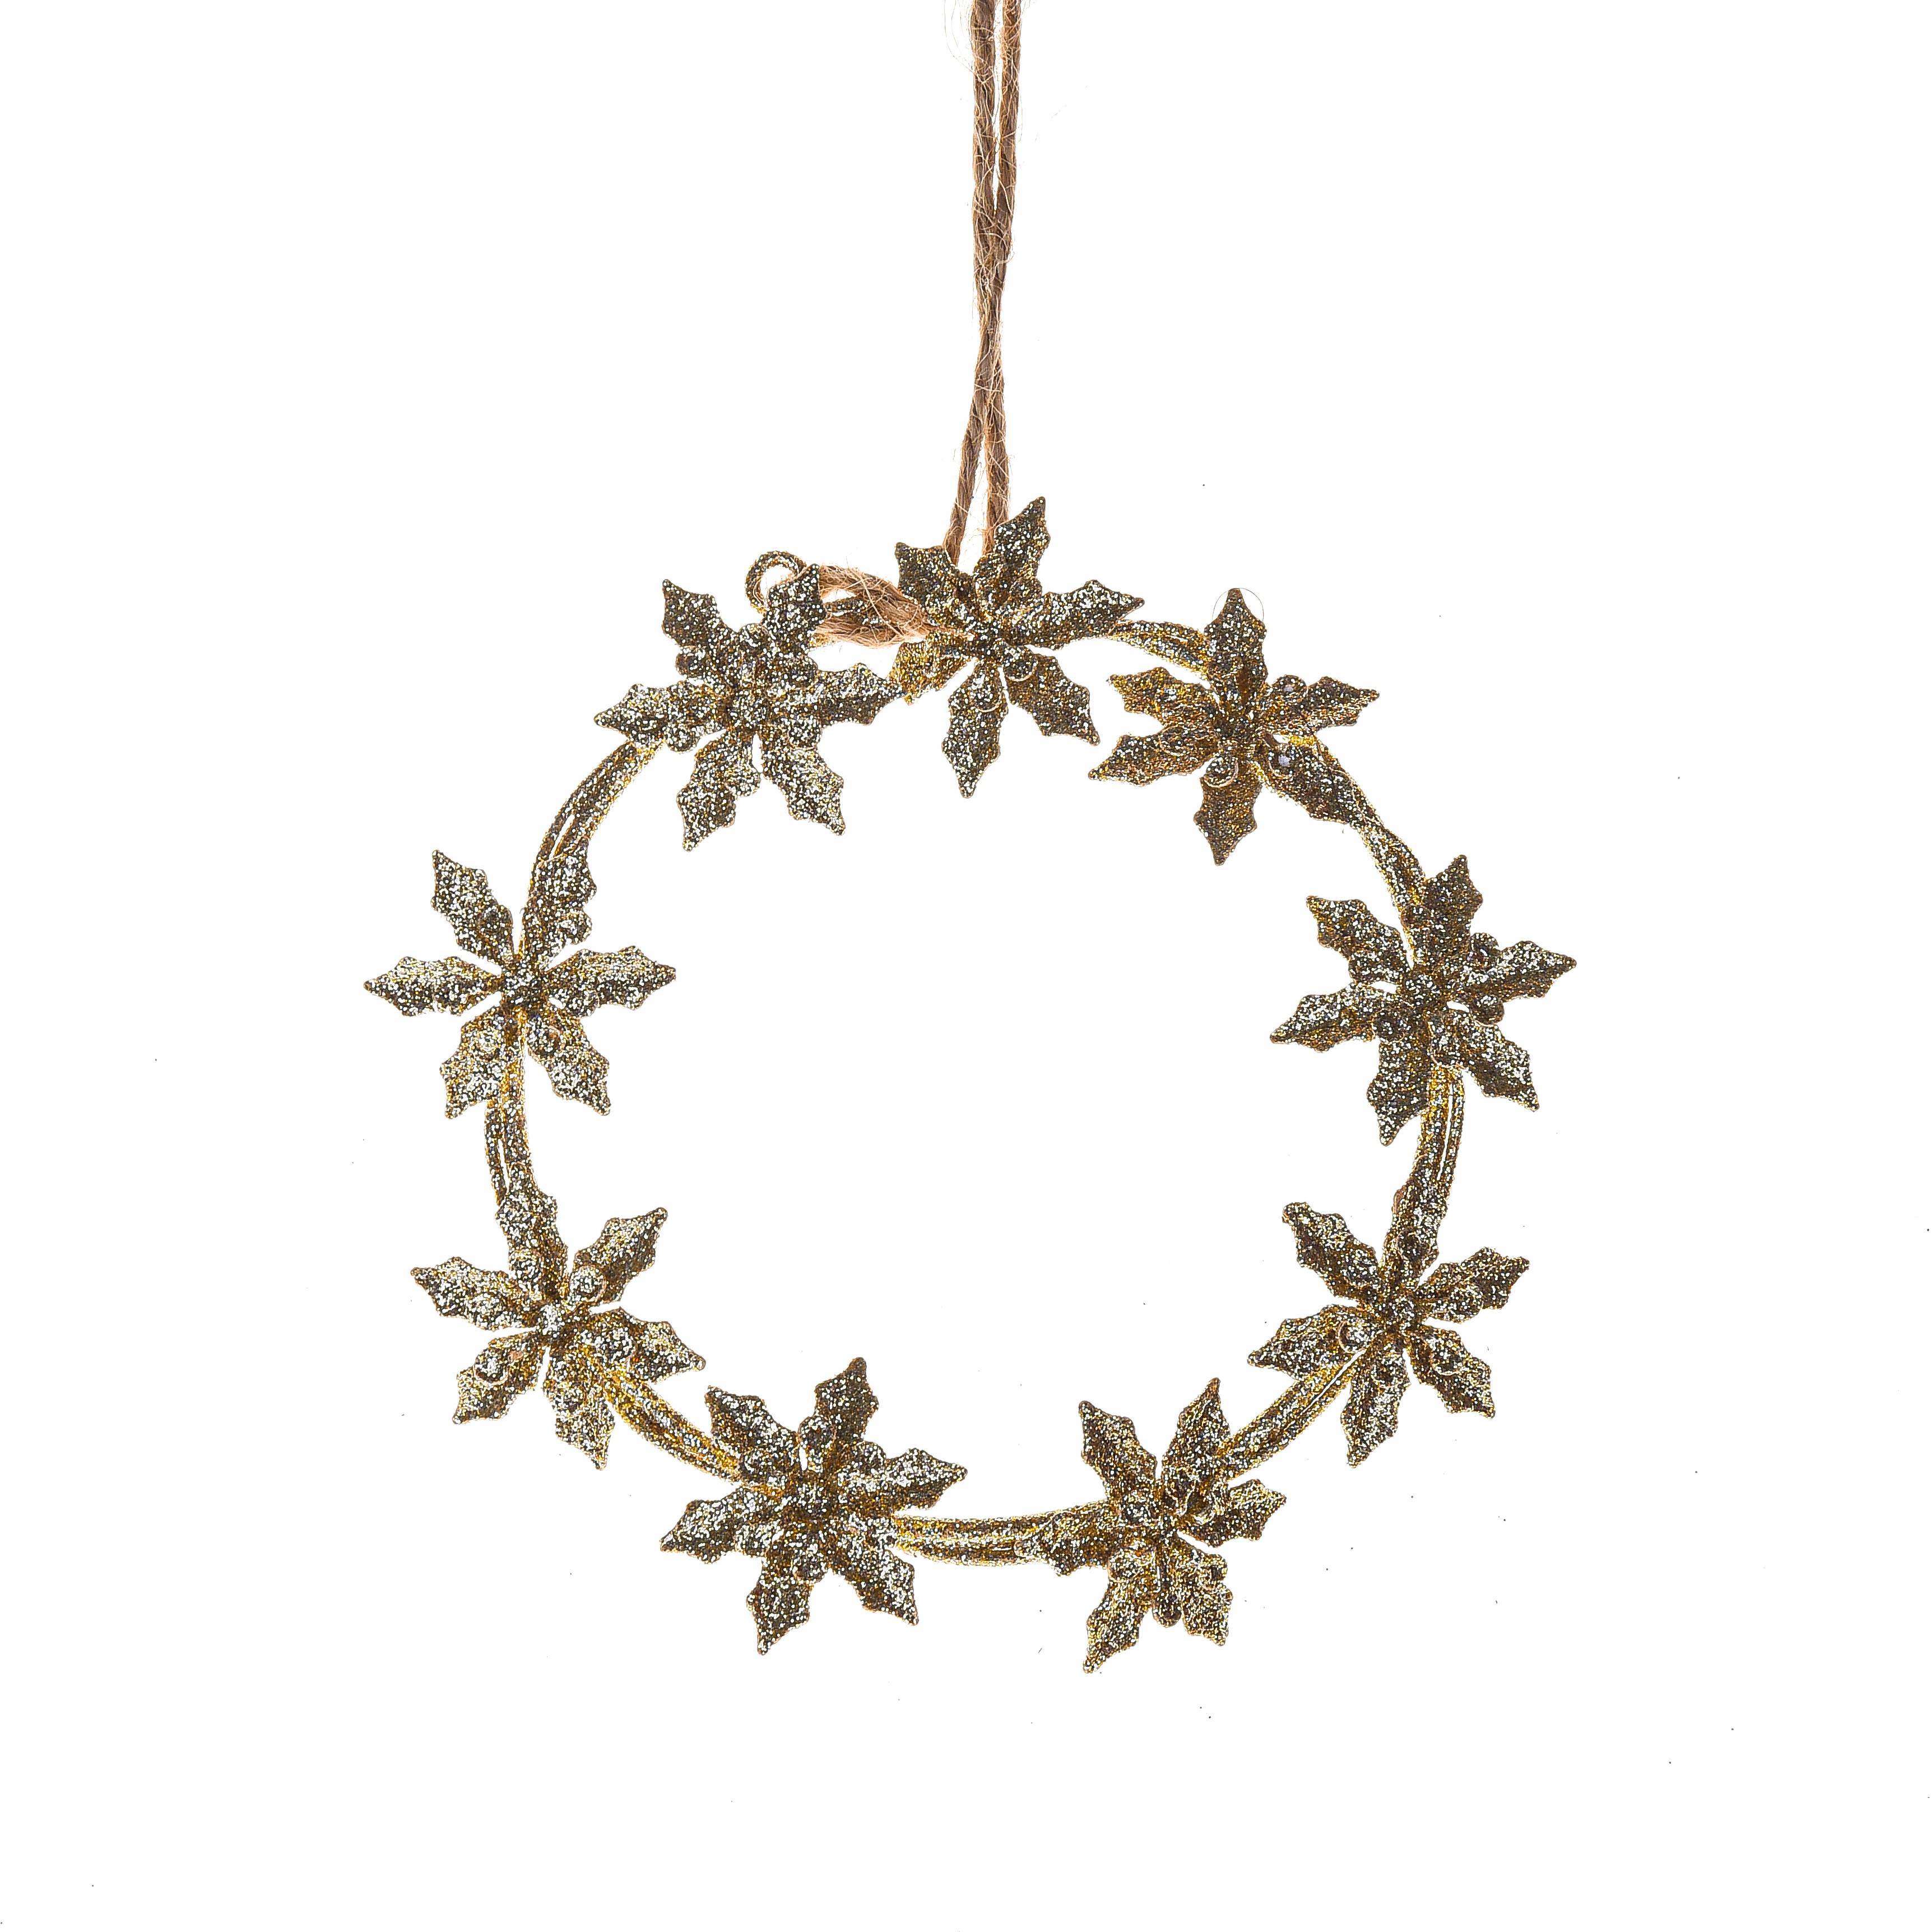 CHRISTMAS ITEMS, HANGING BALLS AND DECORATIONS IN METAL, CORONCINA D.11 CM METALLO C/STELLE